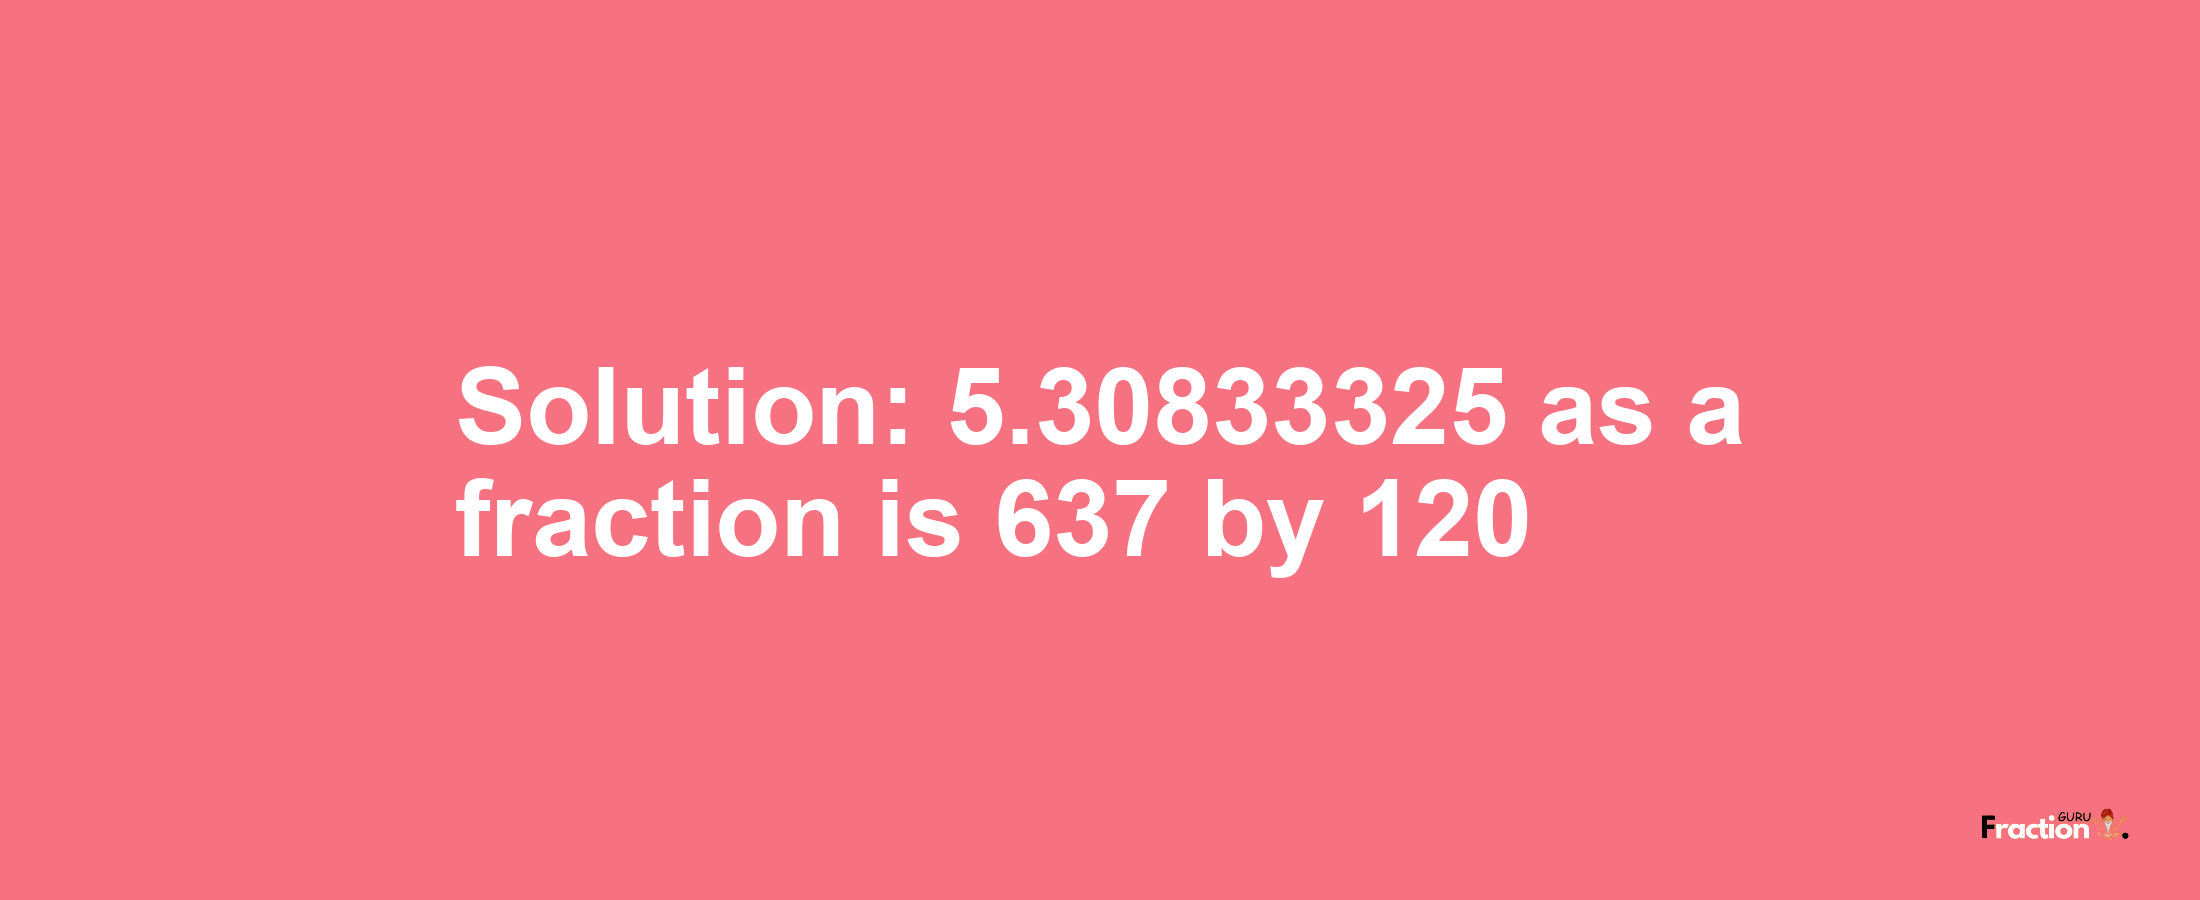 Solution:5.30833325 as a fraction is 637/120